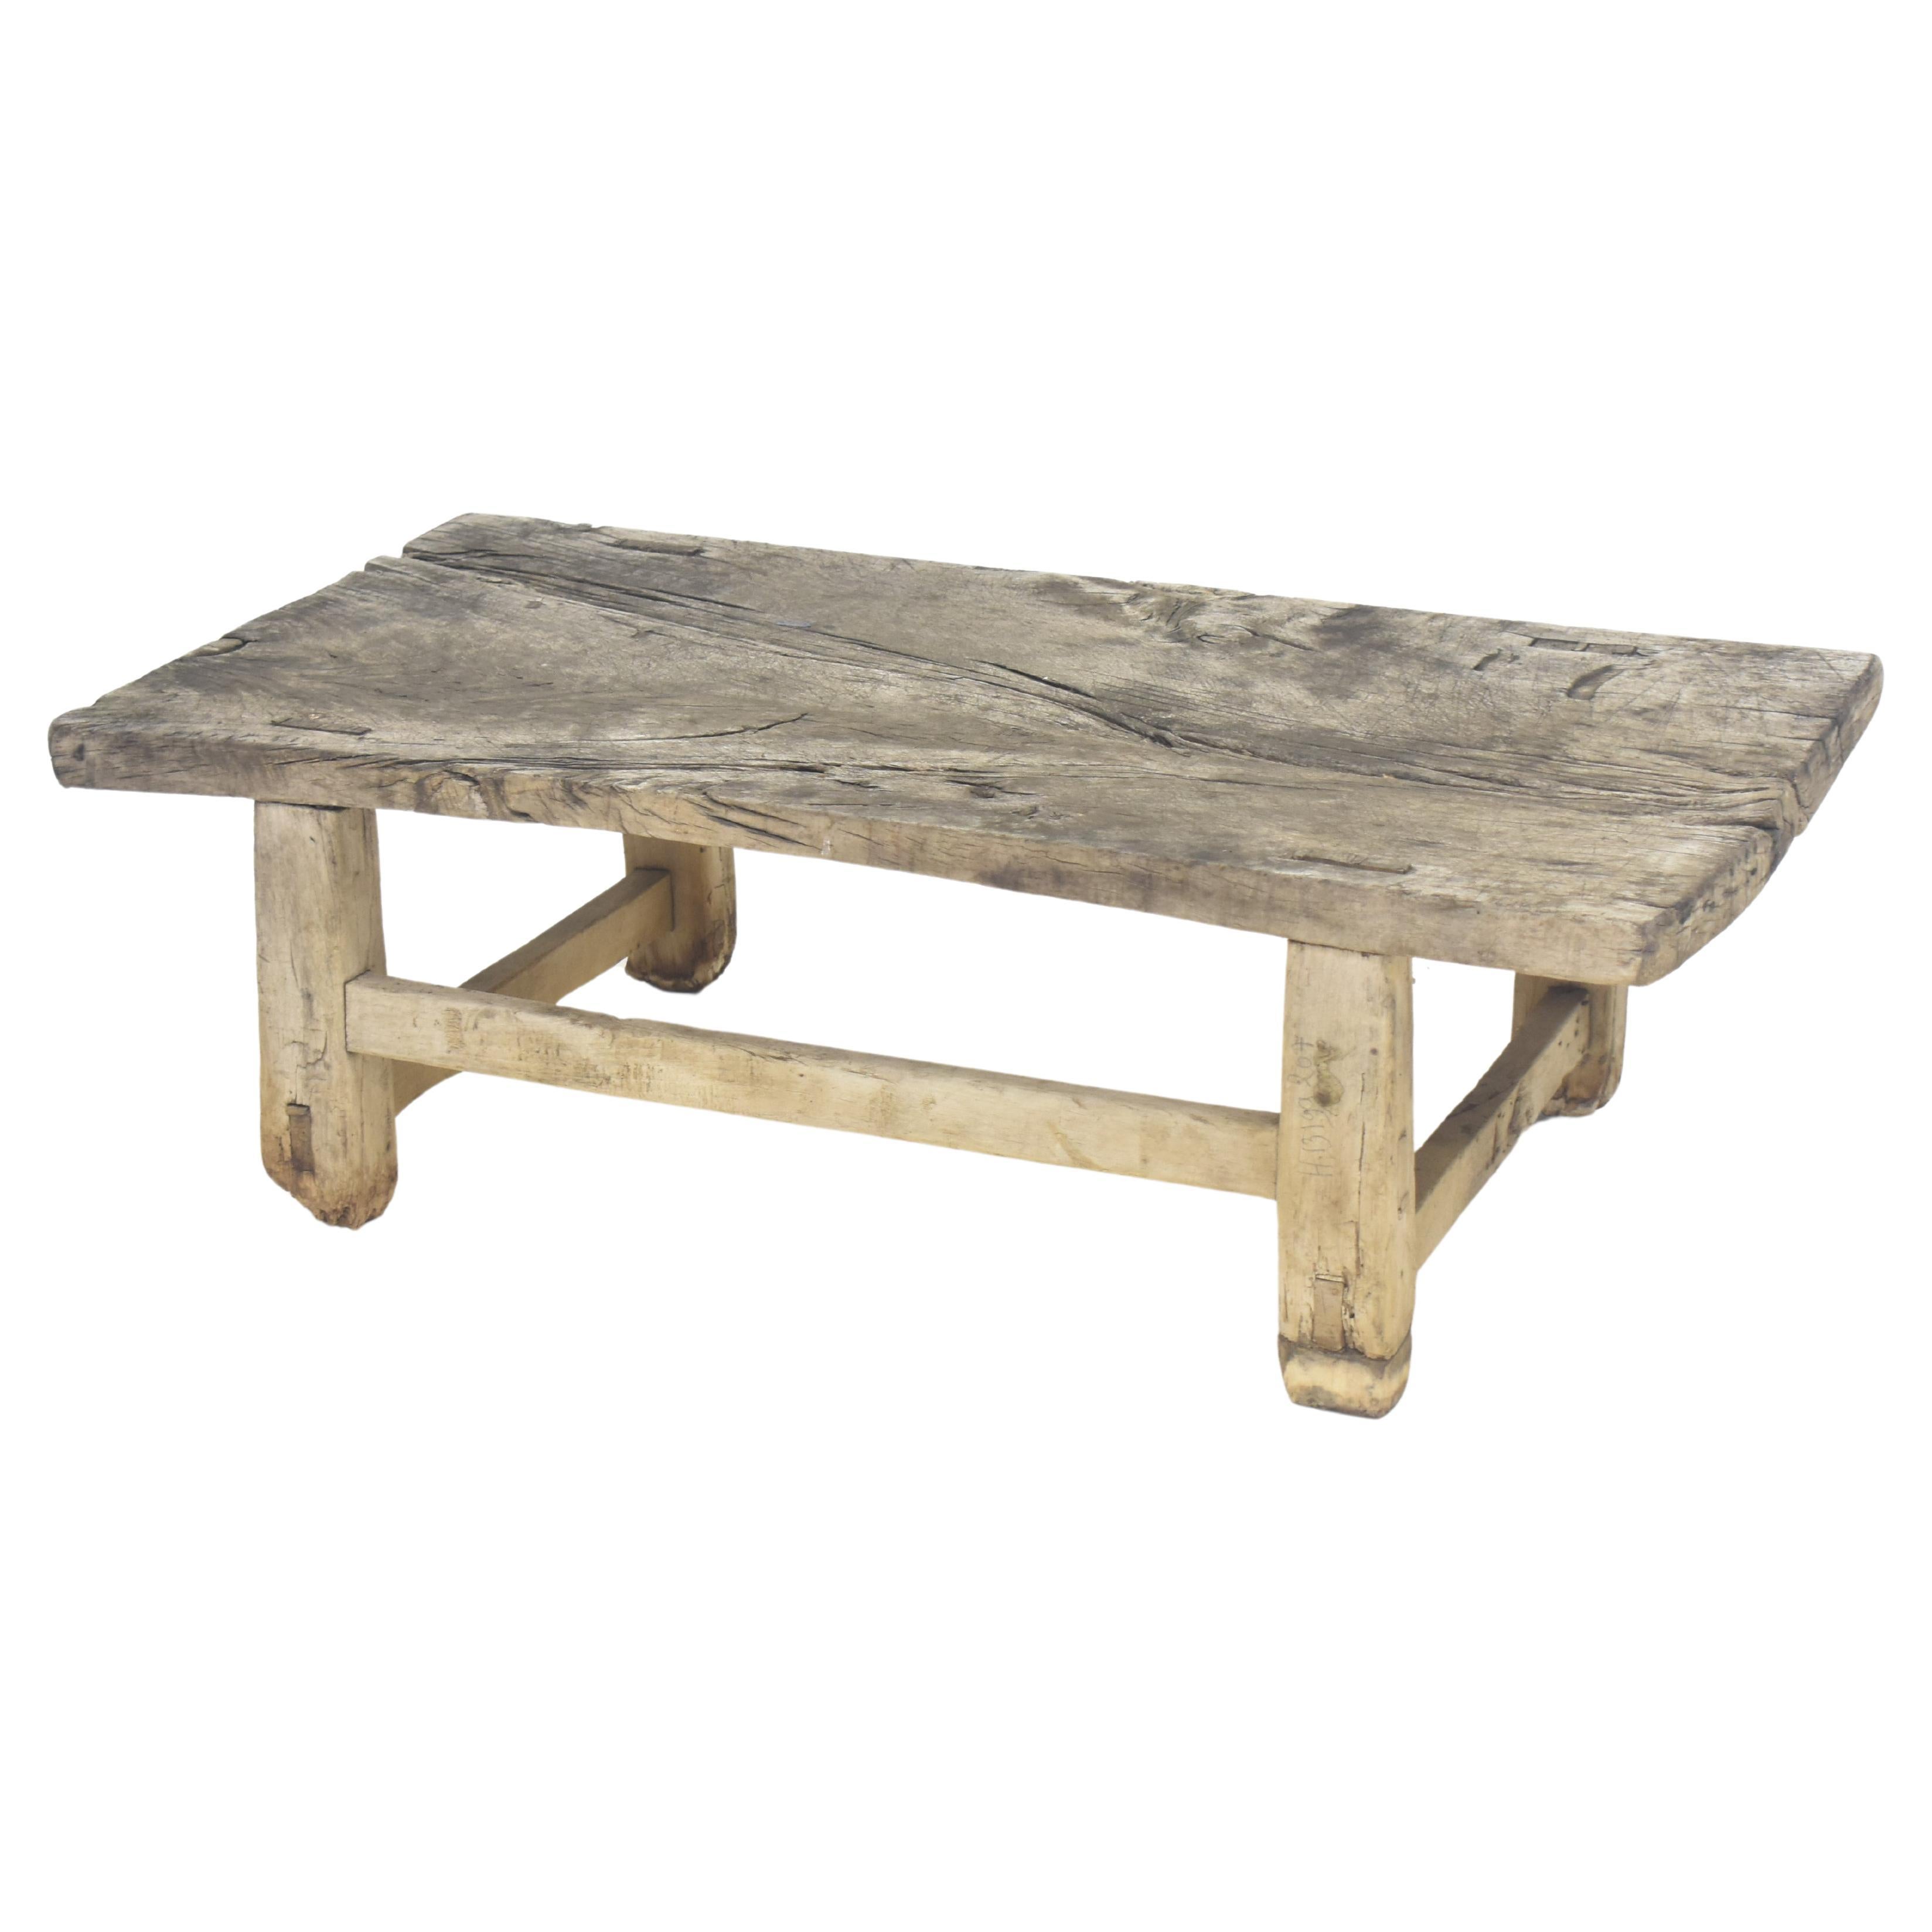 Rustic Wooden Coffee Table For Sale